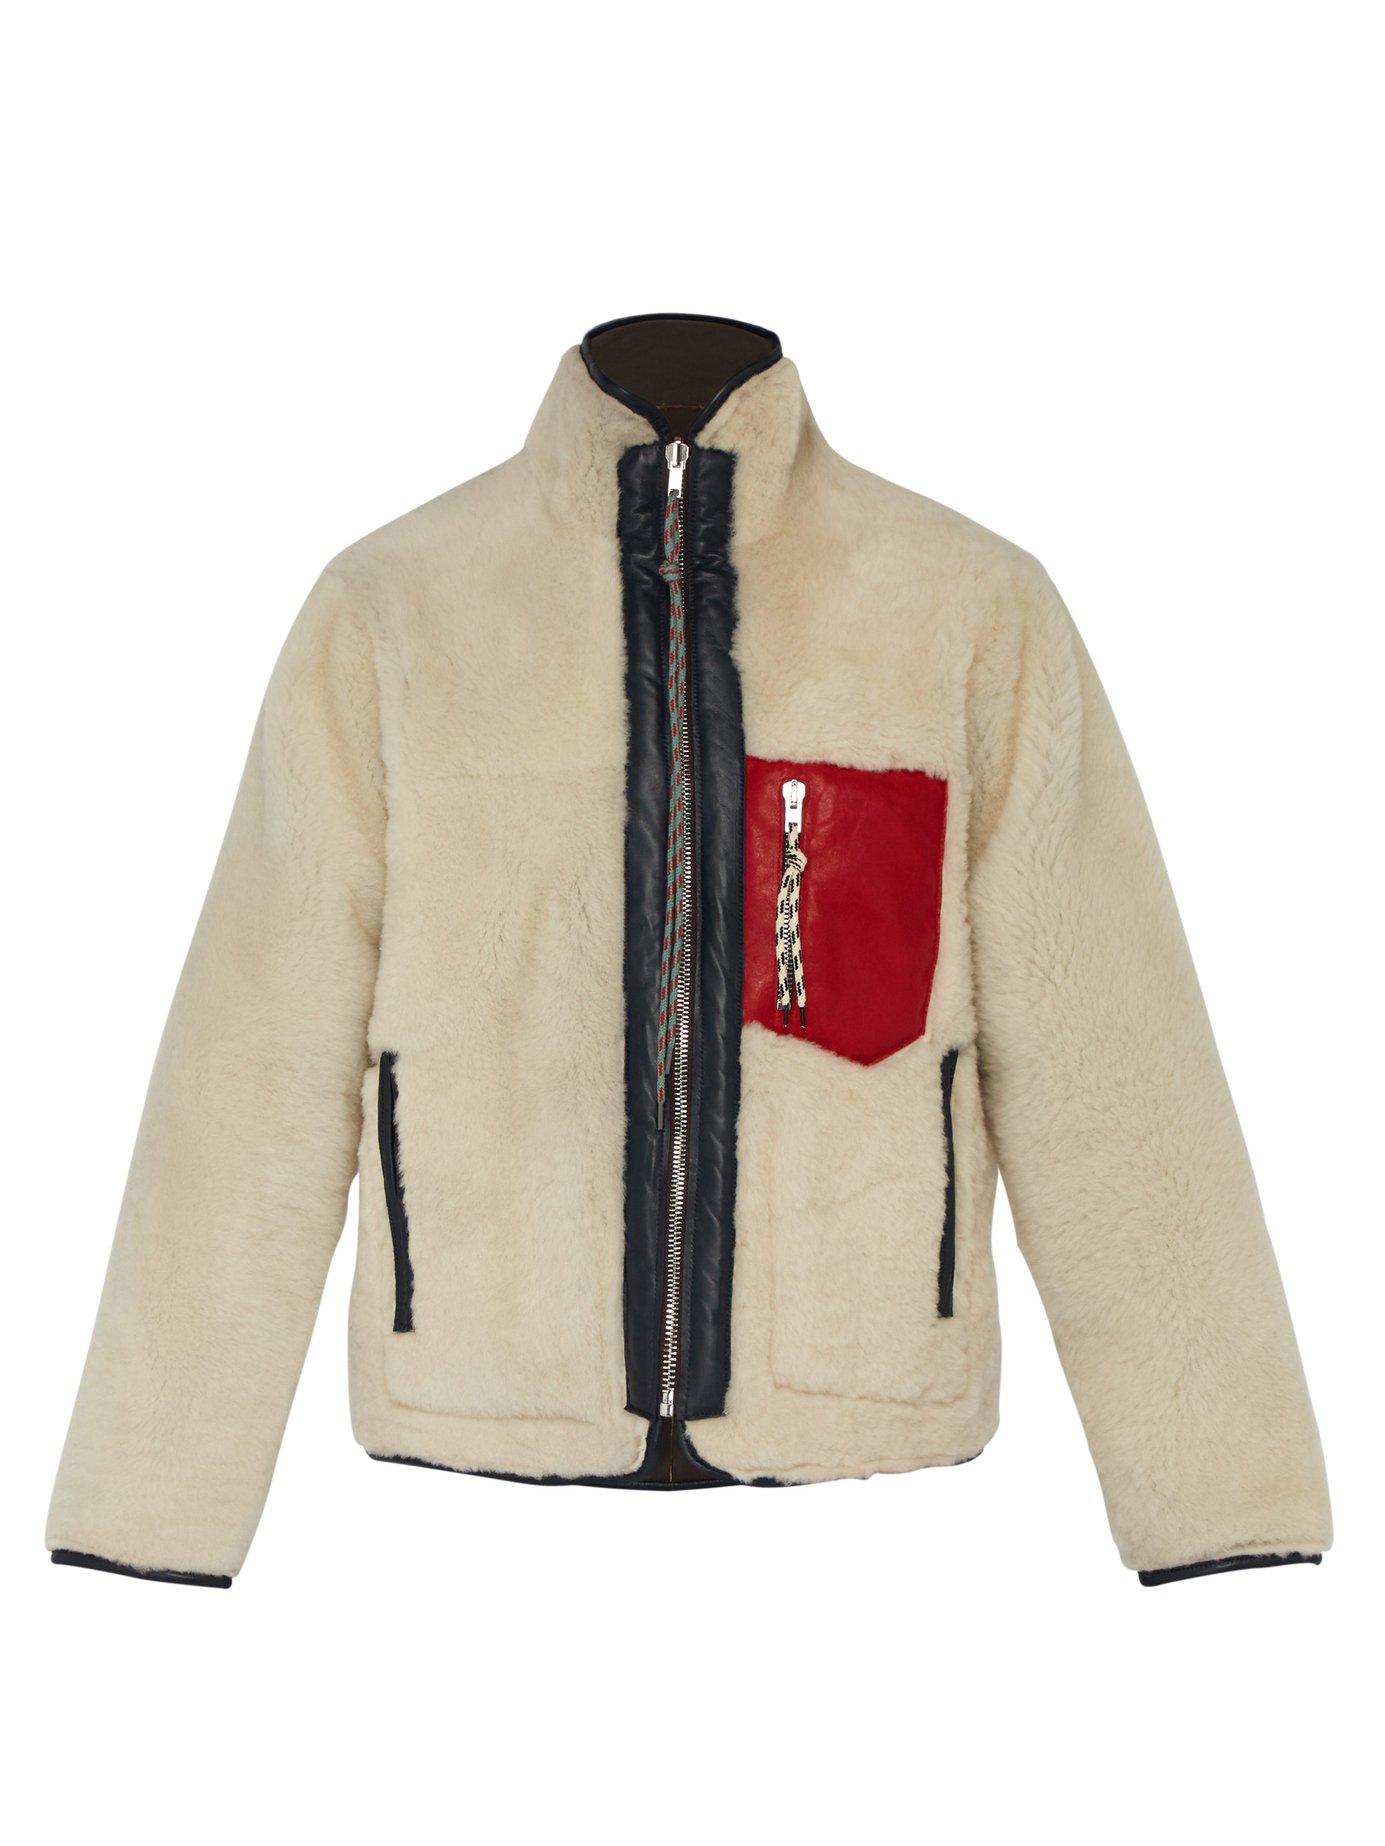 Lyst - Aries Pat Leather Trimmed Sheepskin Jacket in White for Men